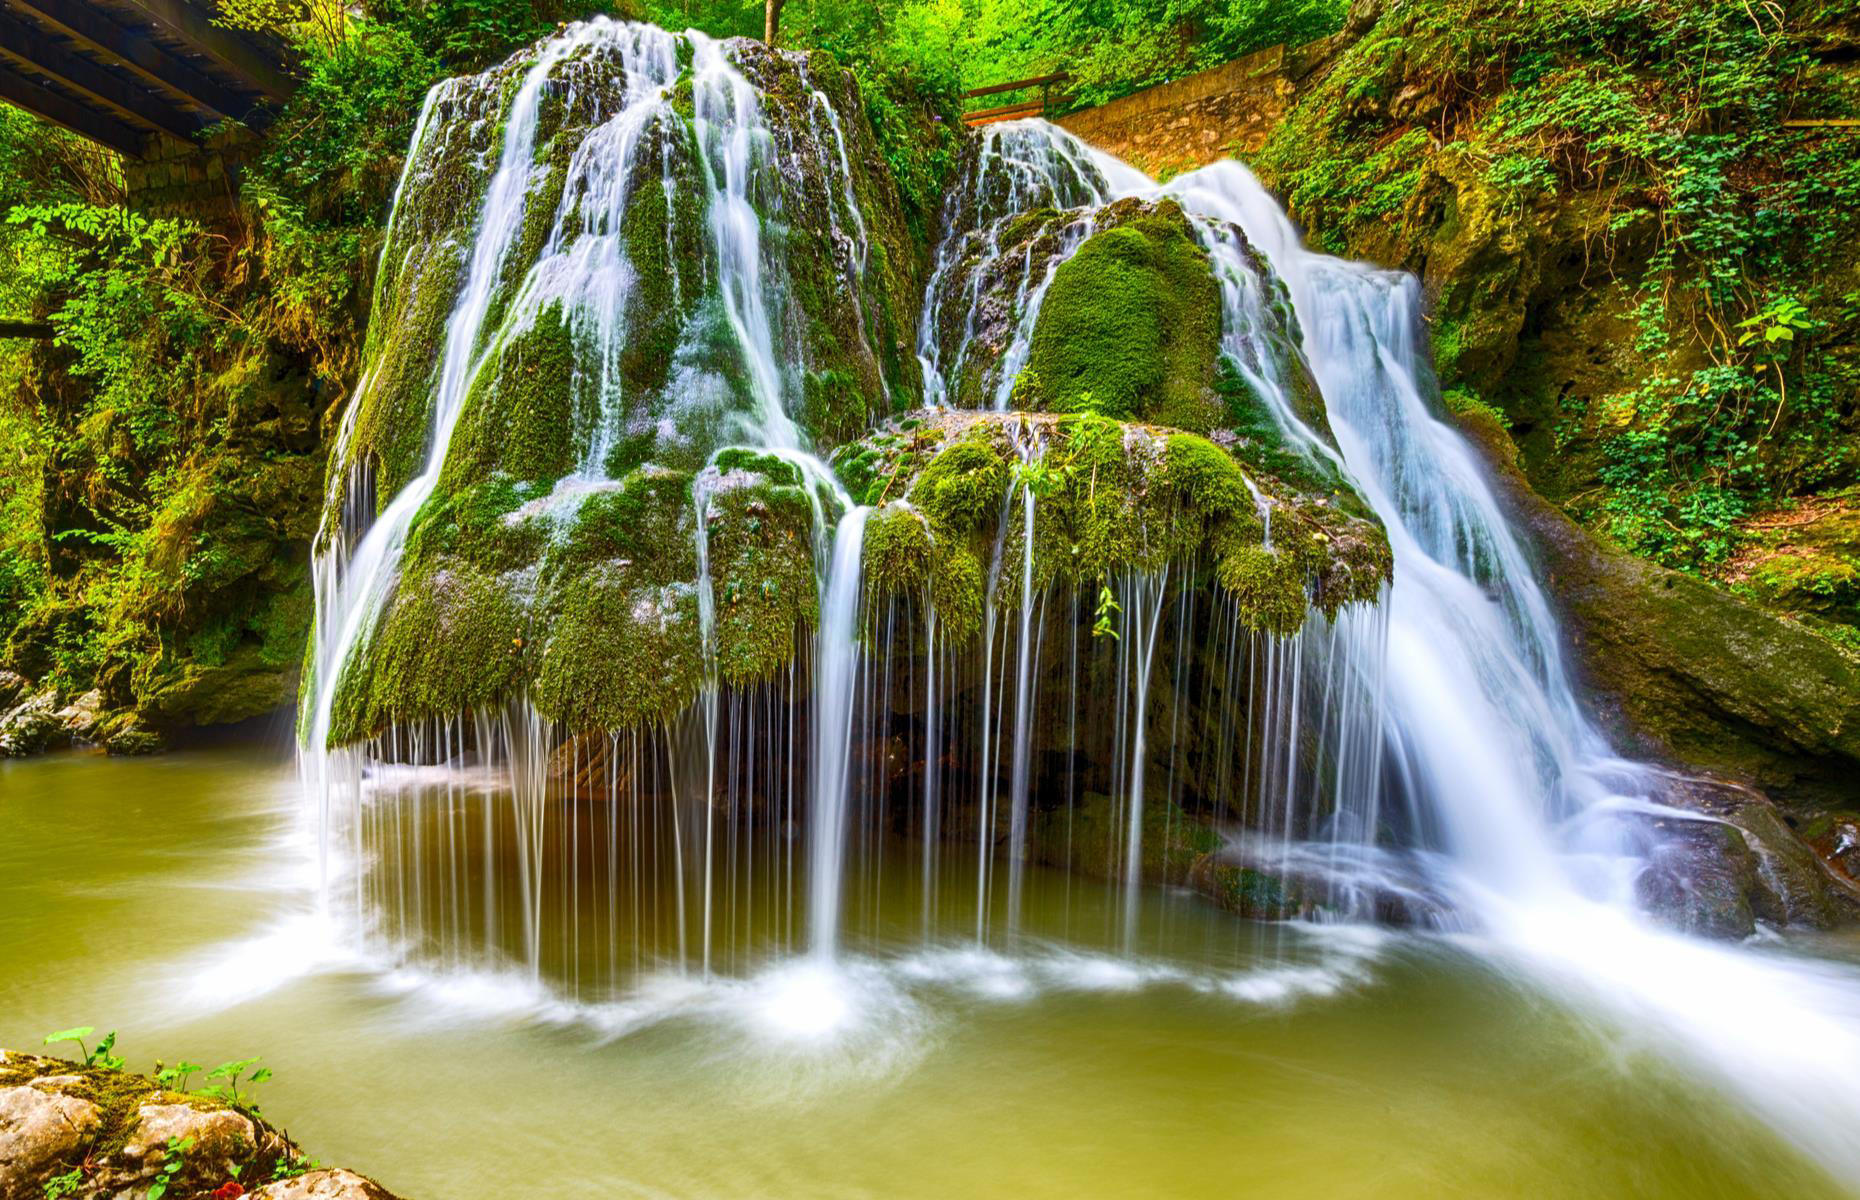 Wonderful waterfalls around the world that are truly spectacular